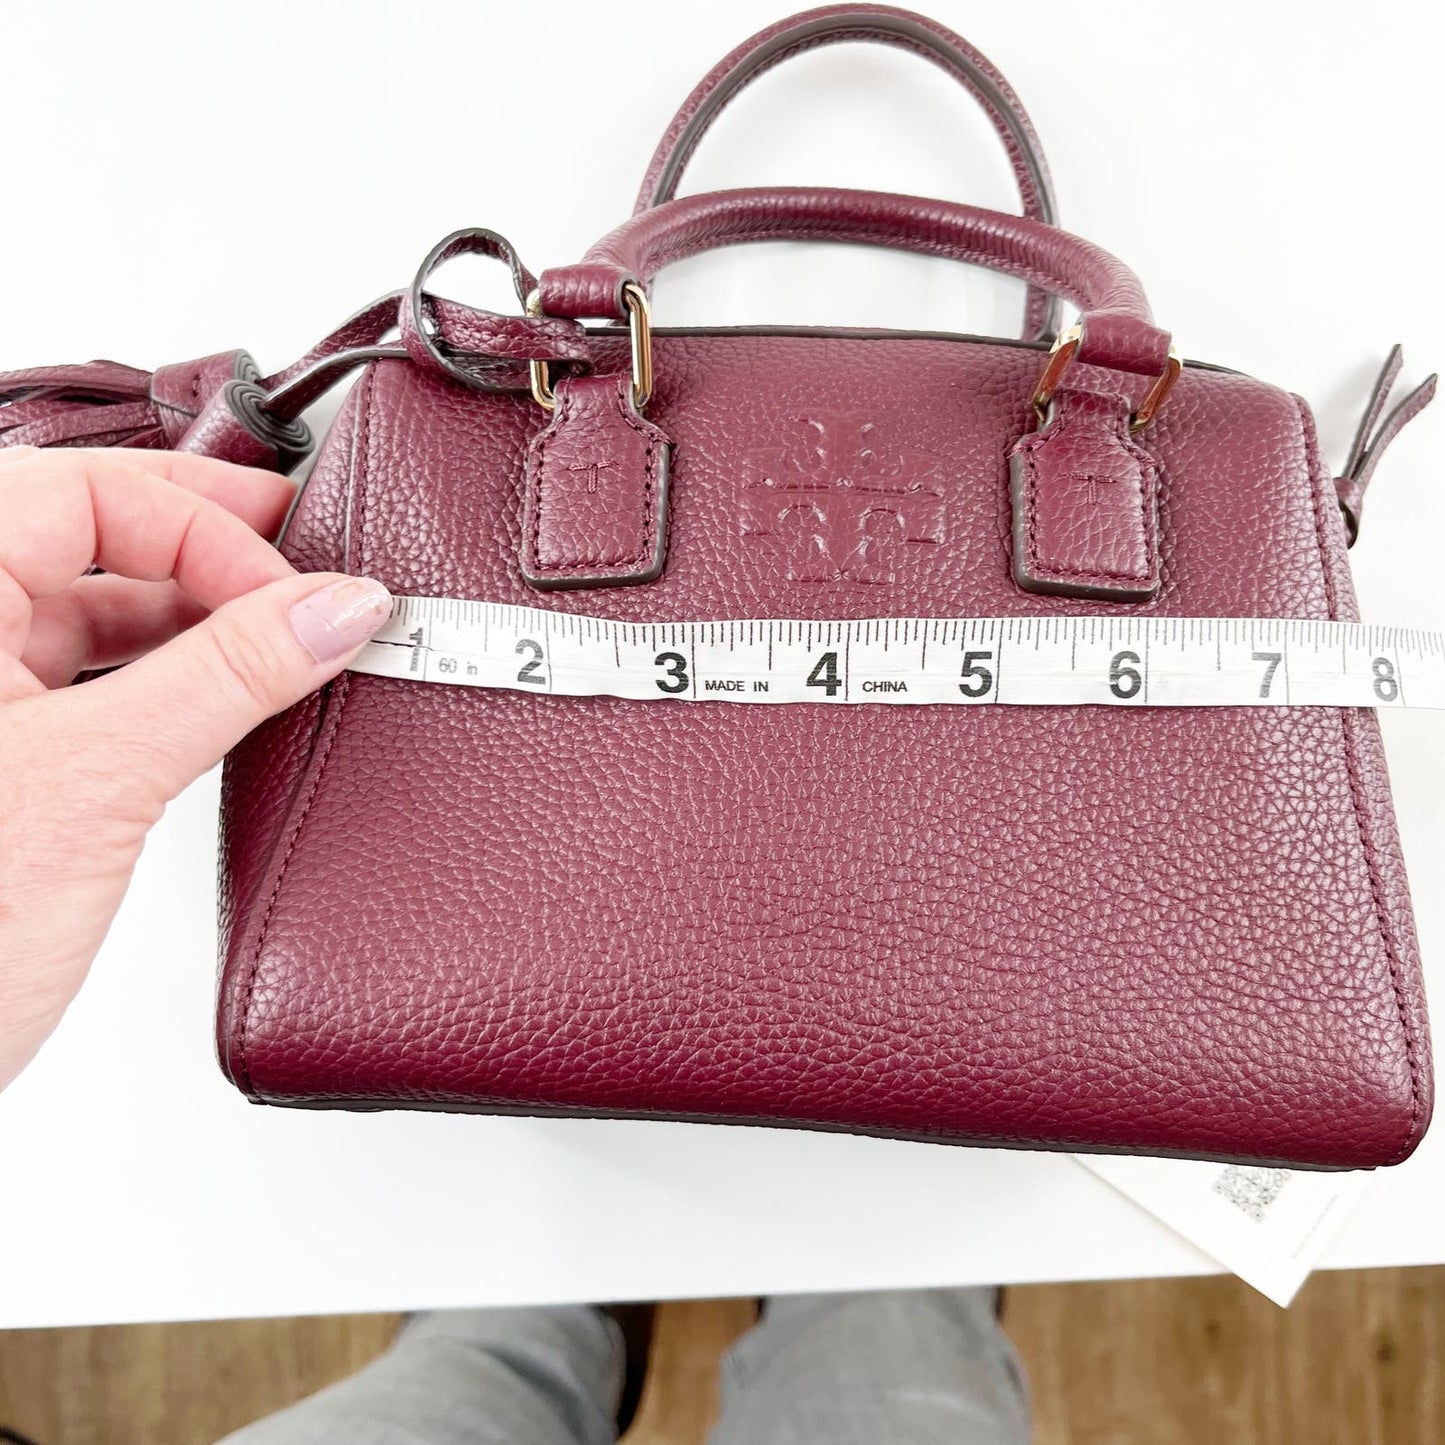 Tory Burch Thea Leather Crossbody Tophandle Satchel Purse Maroon Red NWT